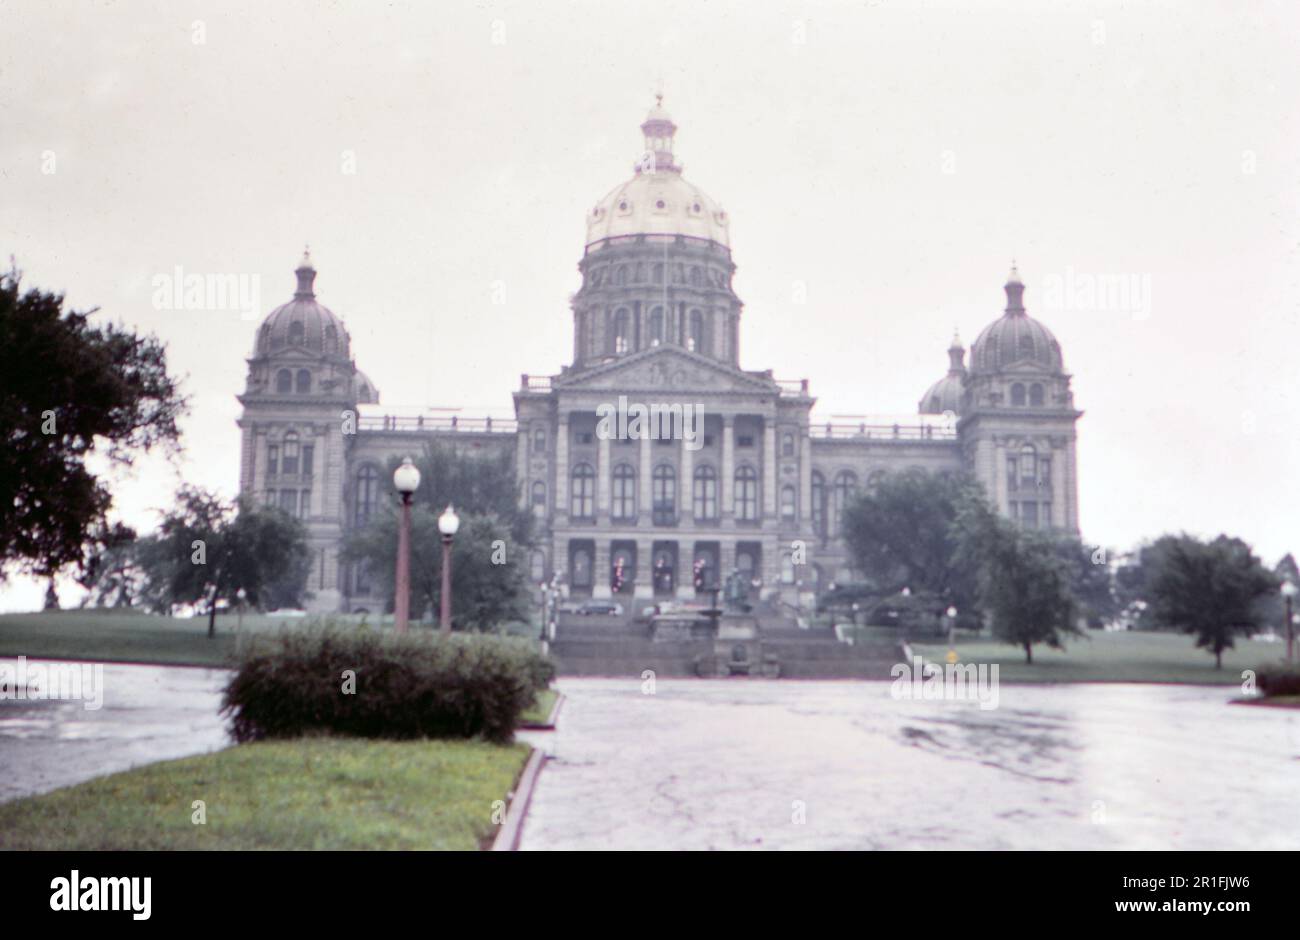 Rainy day at the Iowa state capitol in Des Moines Iowa (r) ca. 1950-1955 Stock Photo